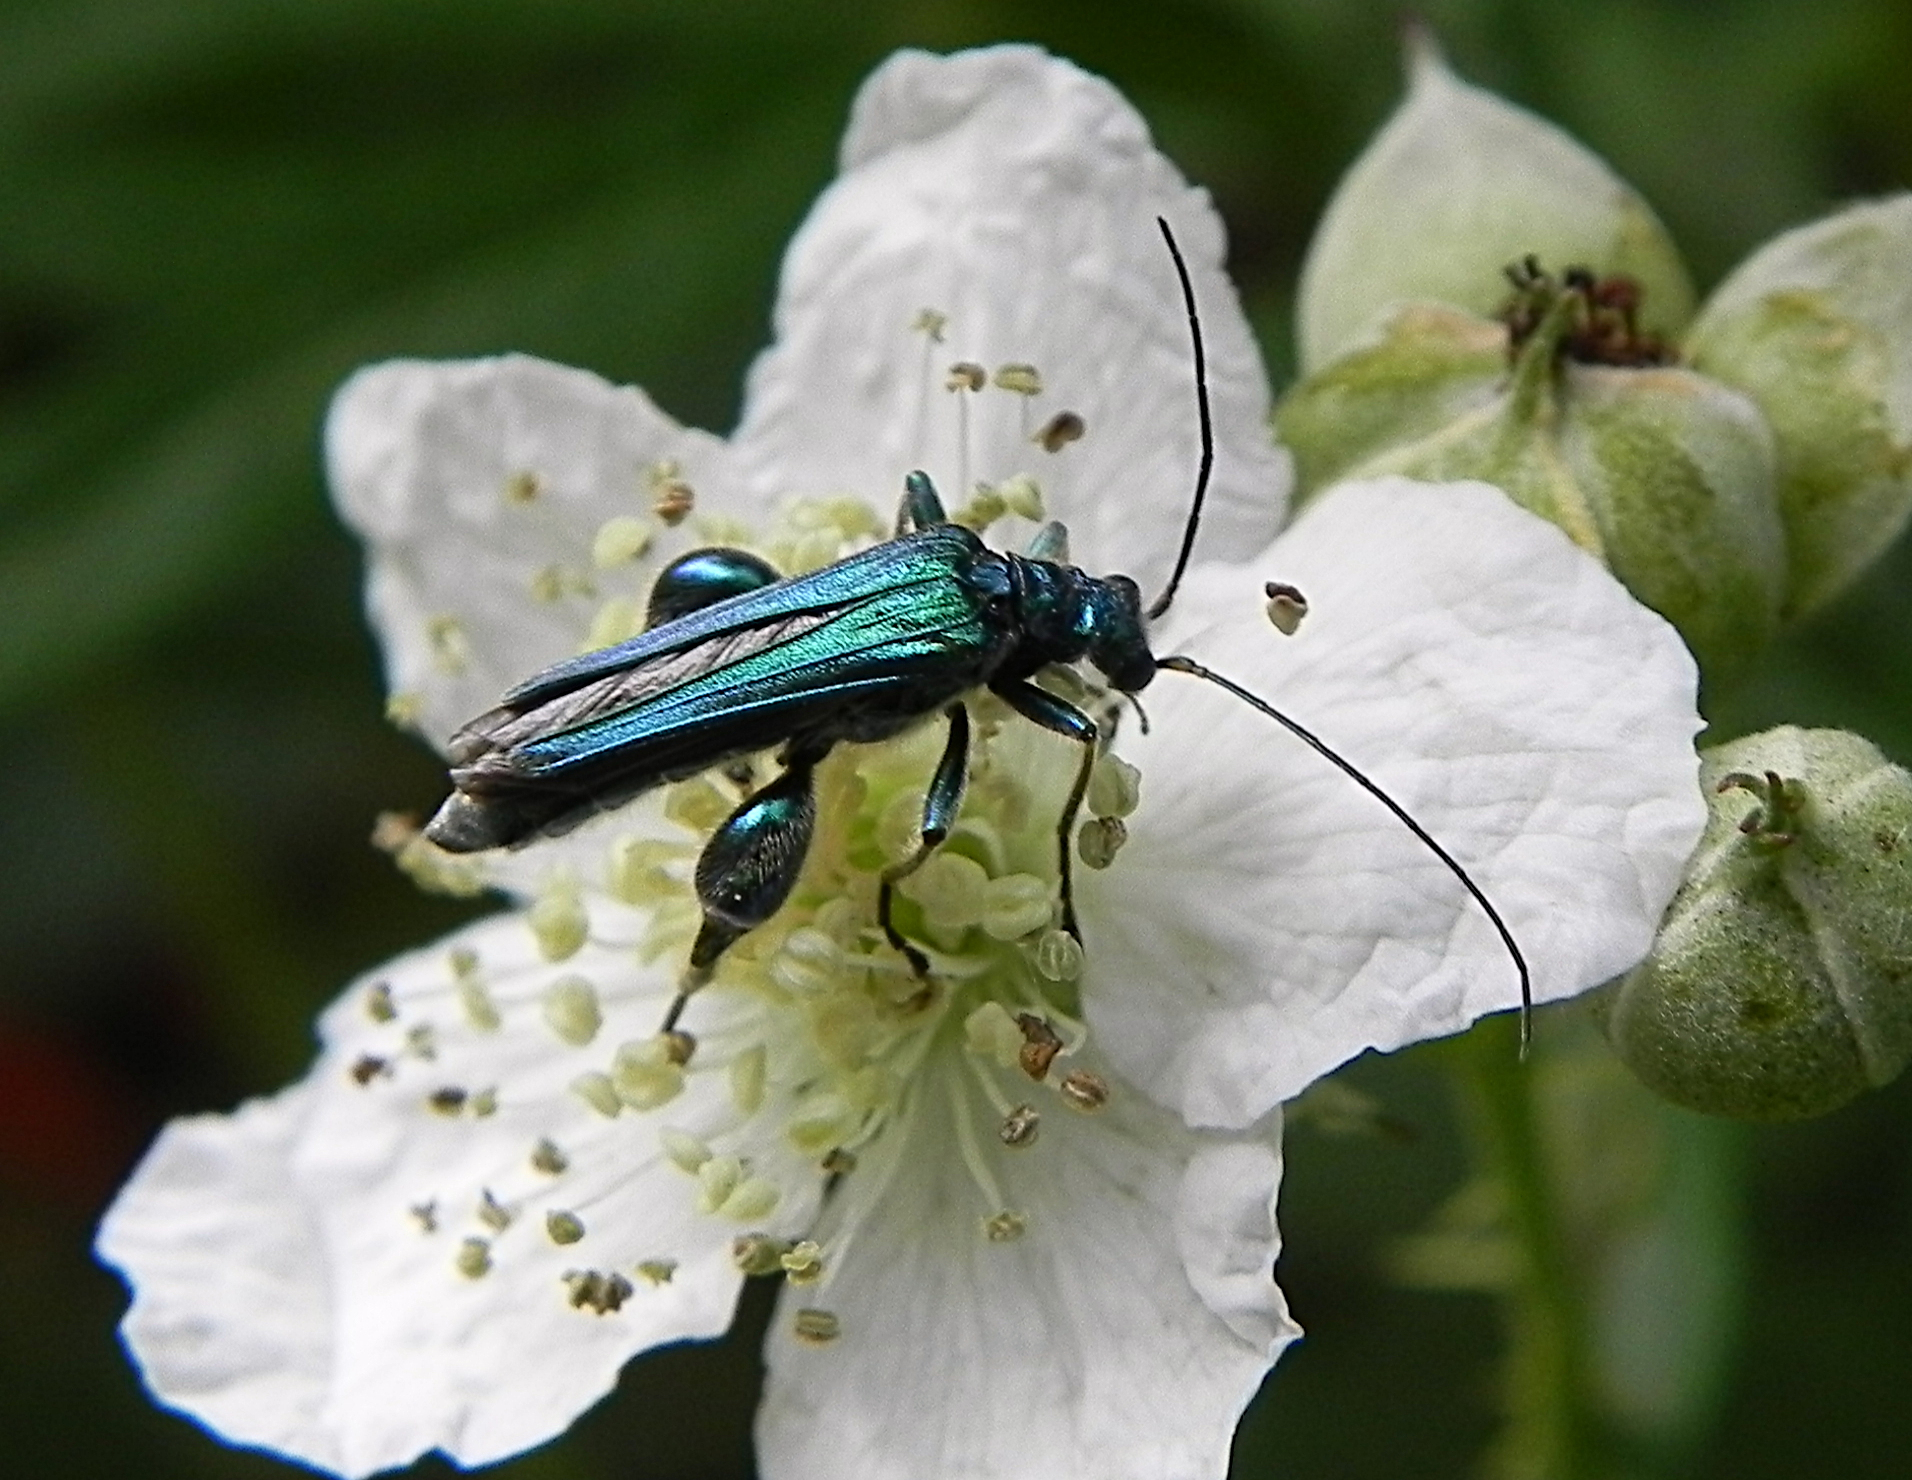 fam. Oedemeridae,. Italia, Brescia, 1 Jun 2014. Provided by Paolo to children for didactics, but not shot with them.